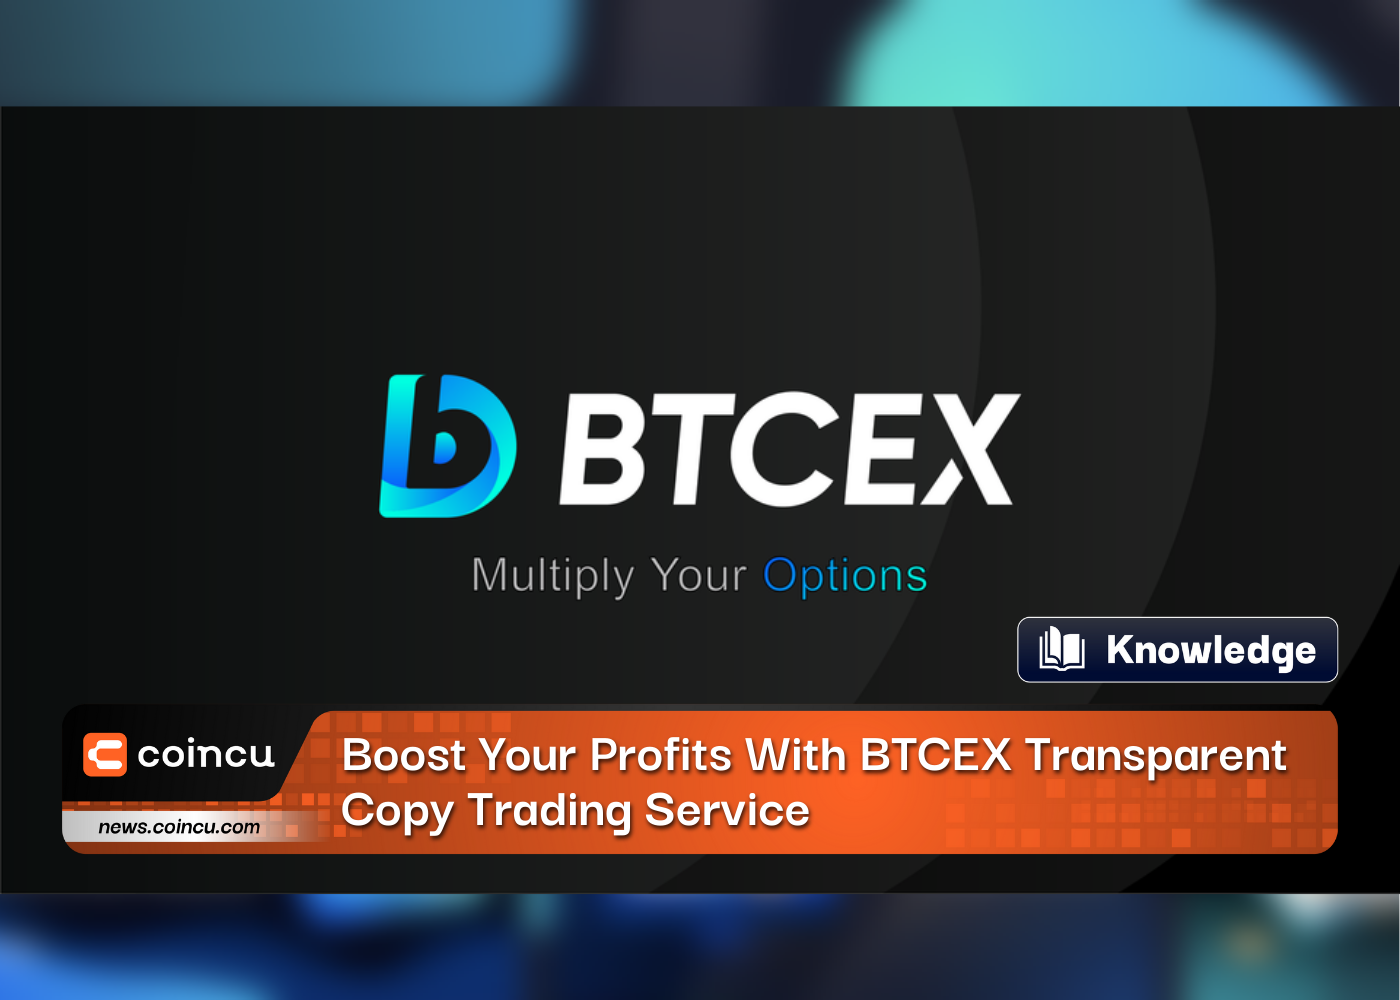 Boost Your Profits With BTCEX Transparent Copy Trading Service